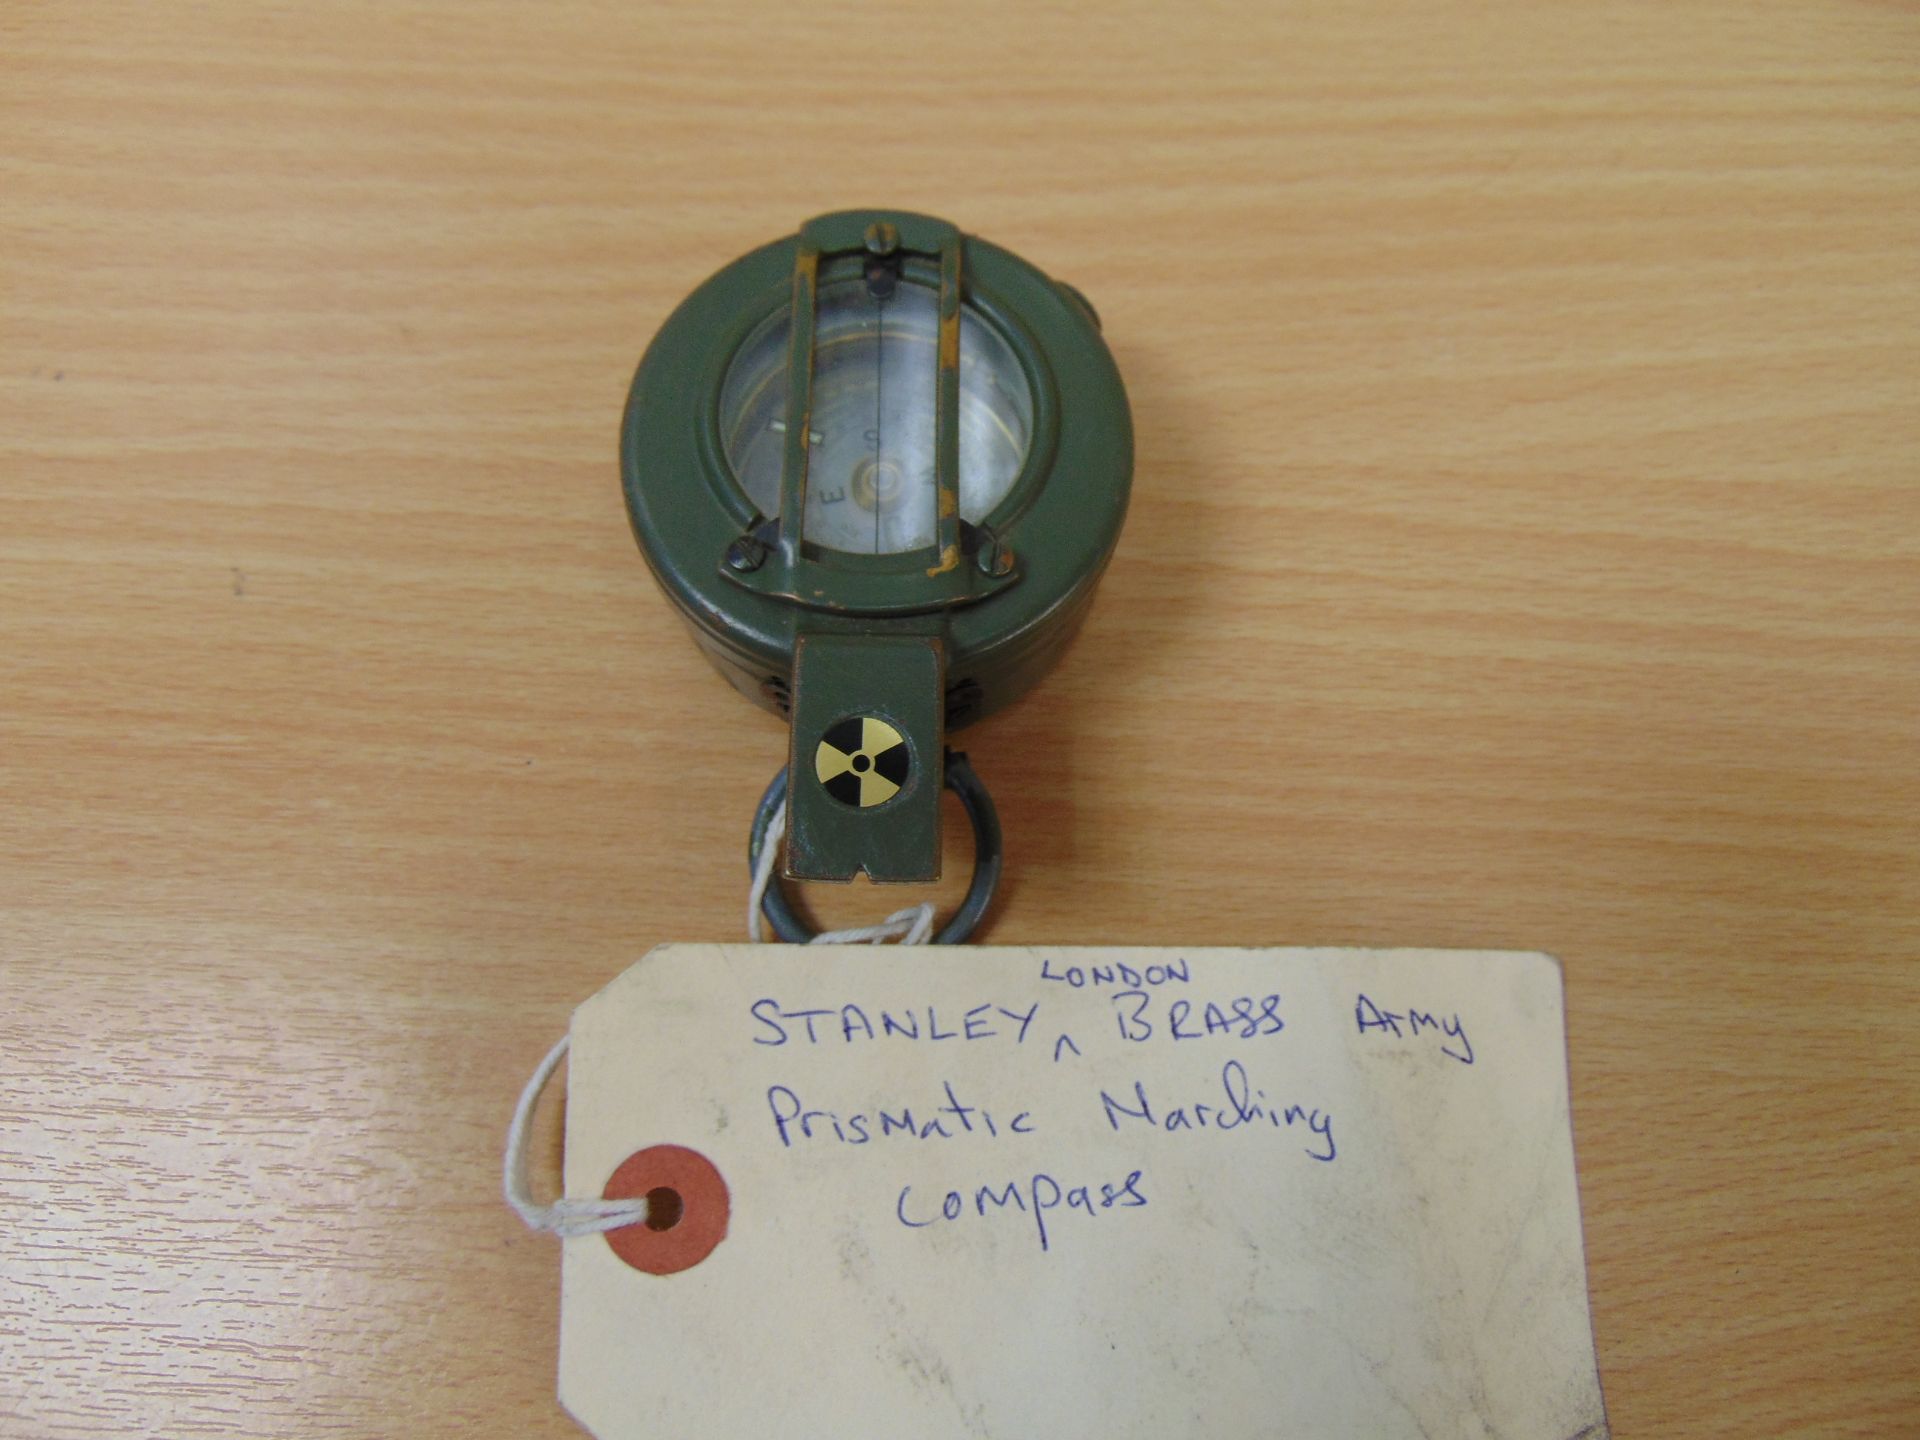 Stanley London Brass Army Prismatic Marching Compass - Image 3 of 3